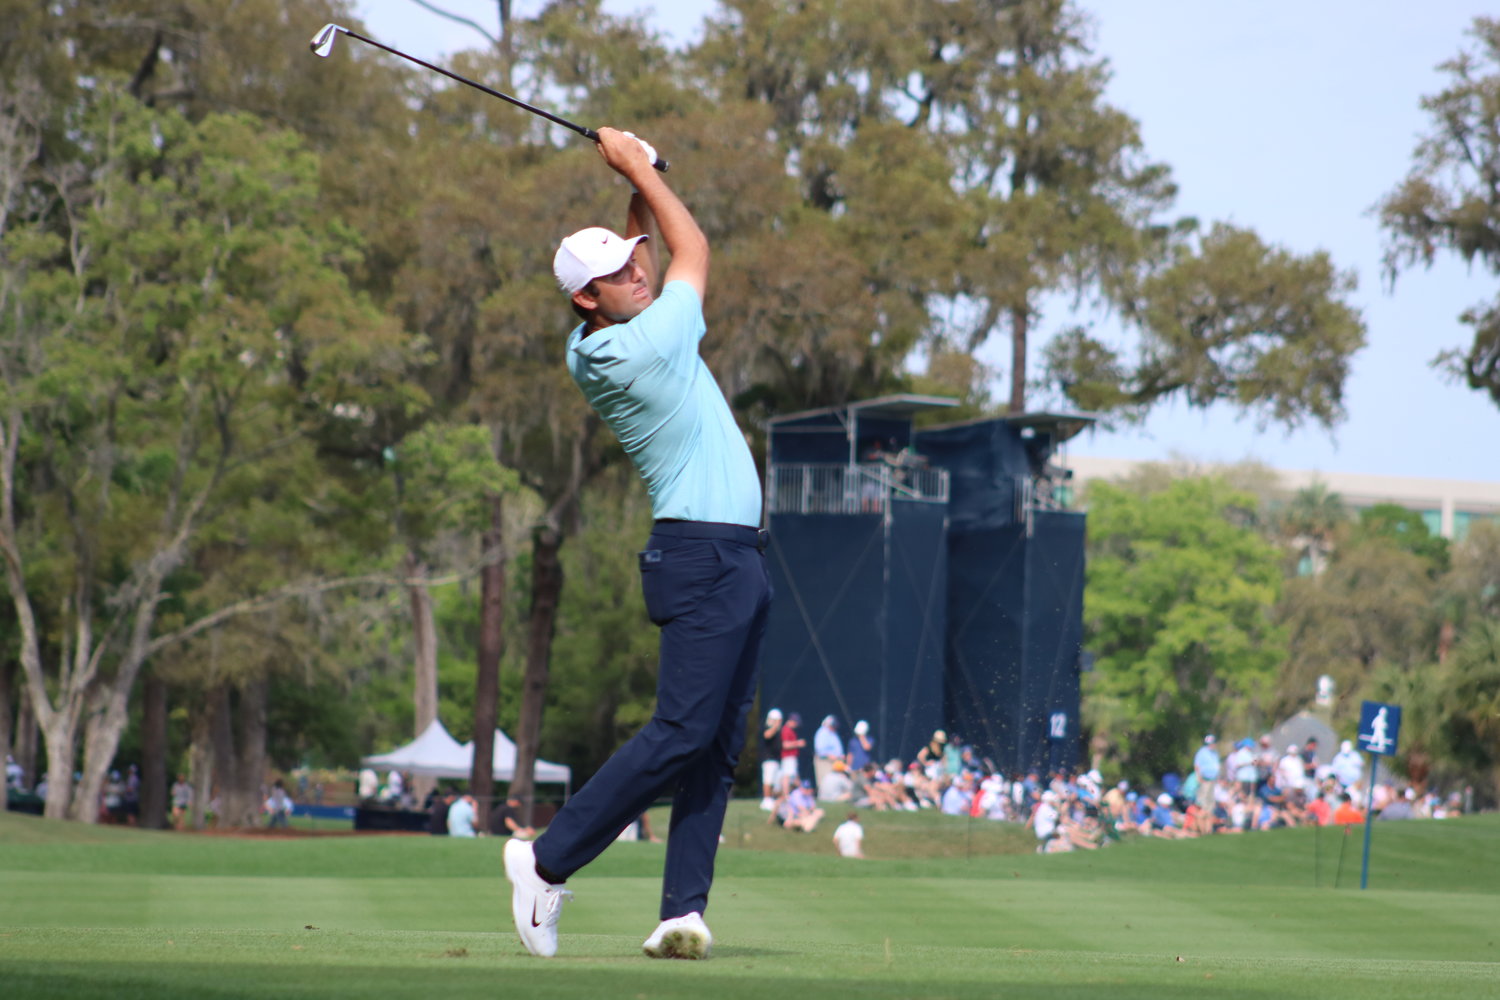 Scottie Scheffler was in command with his shots en route to a five-stroke victory in the 2023 PLAYERS Championship Sunday, March 12.